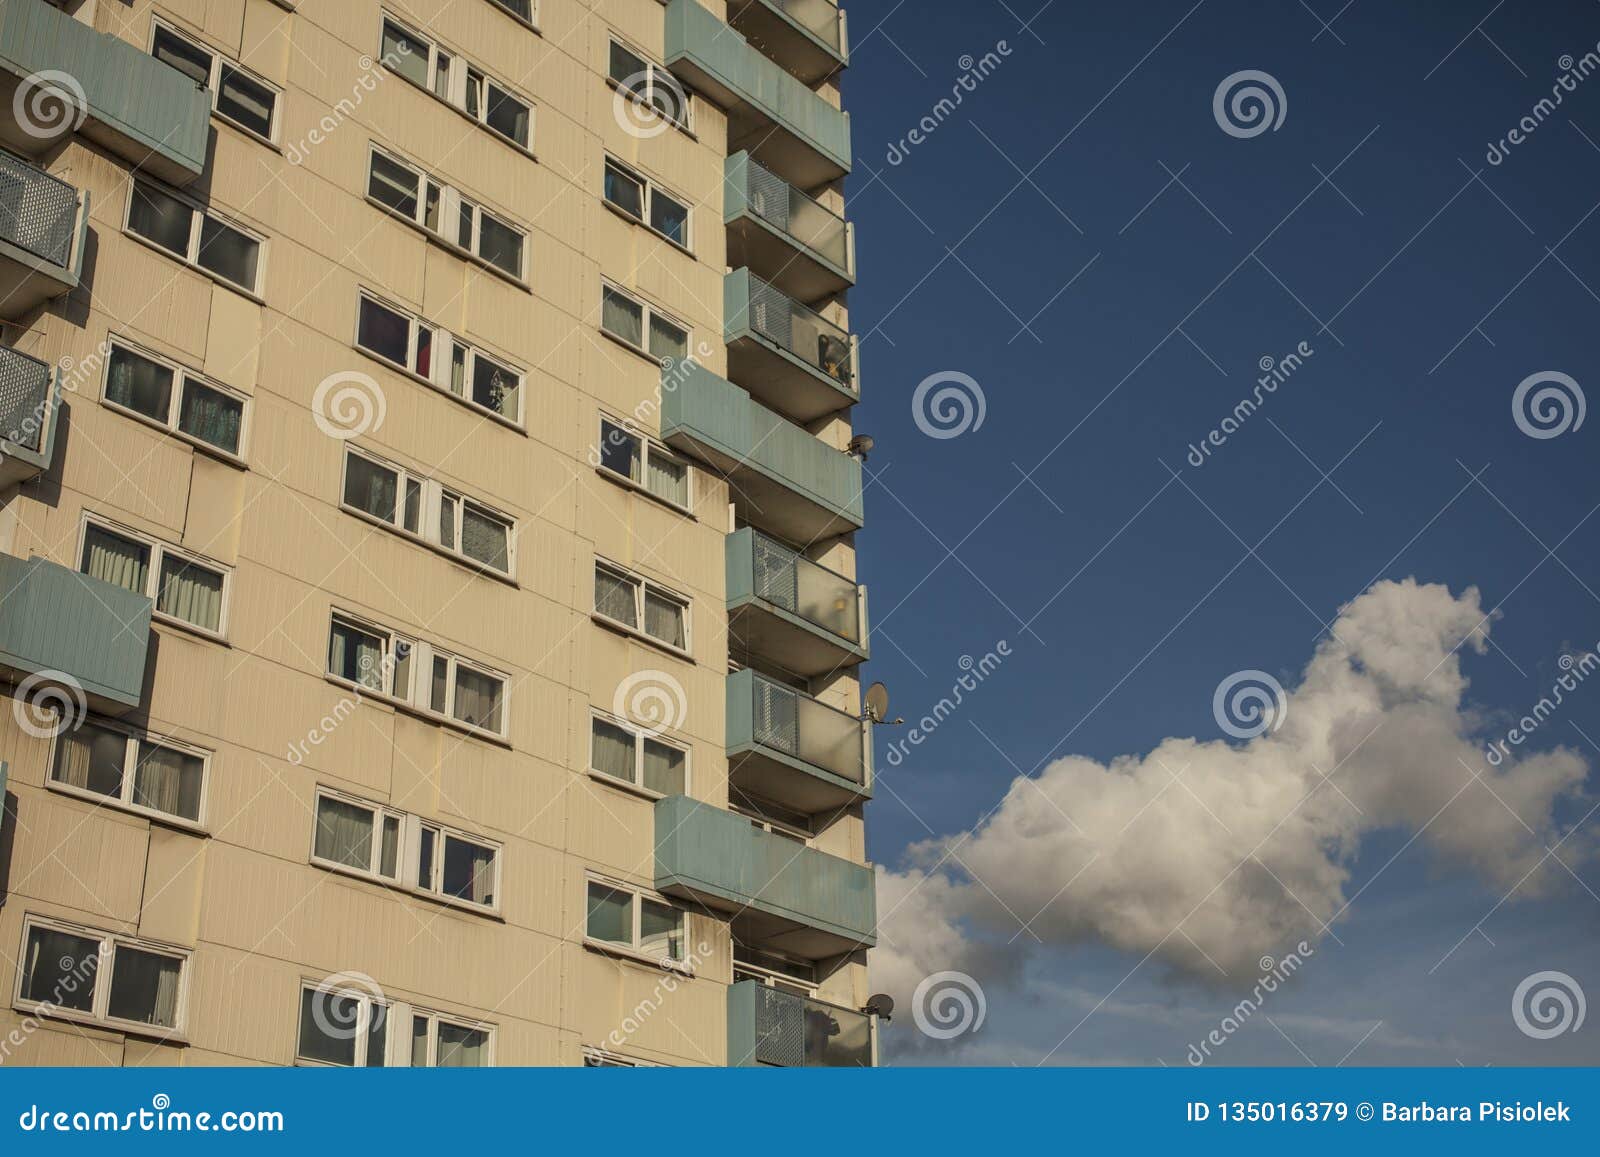 Walking Around London England The Uk A Tower Of Flats And A